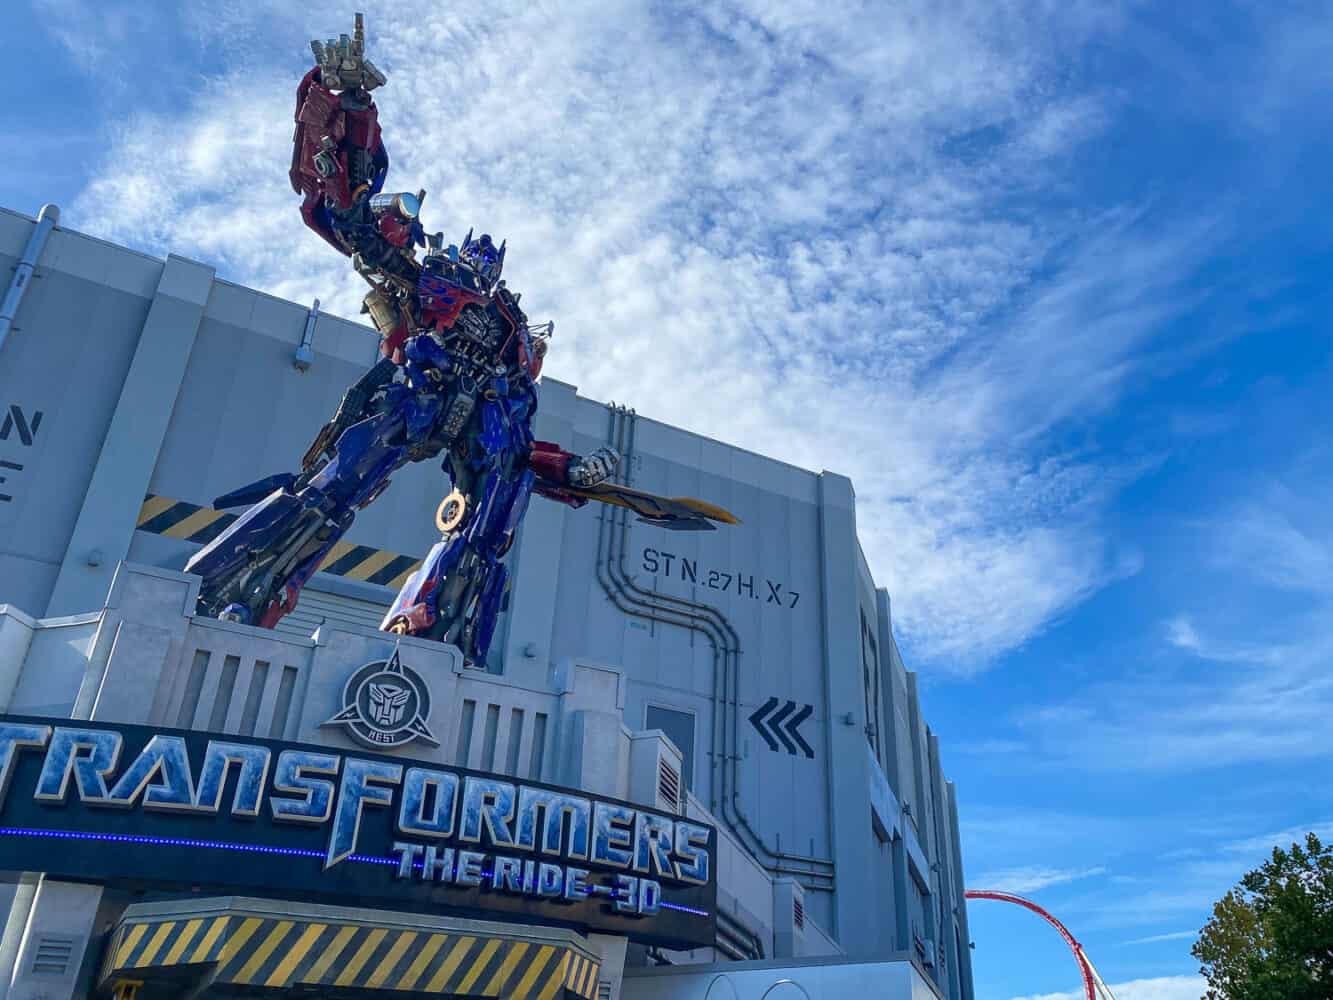 Entrance to the Transformers: The Ride 3D, Universal Orlando, USA